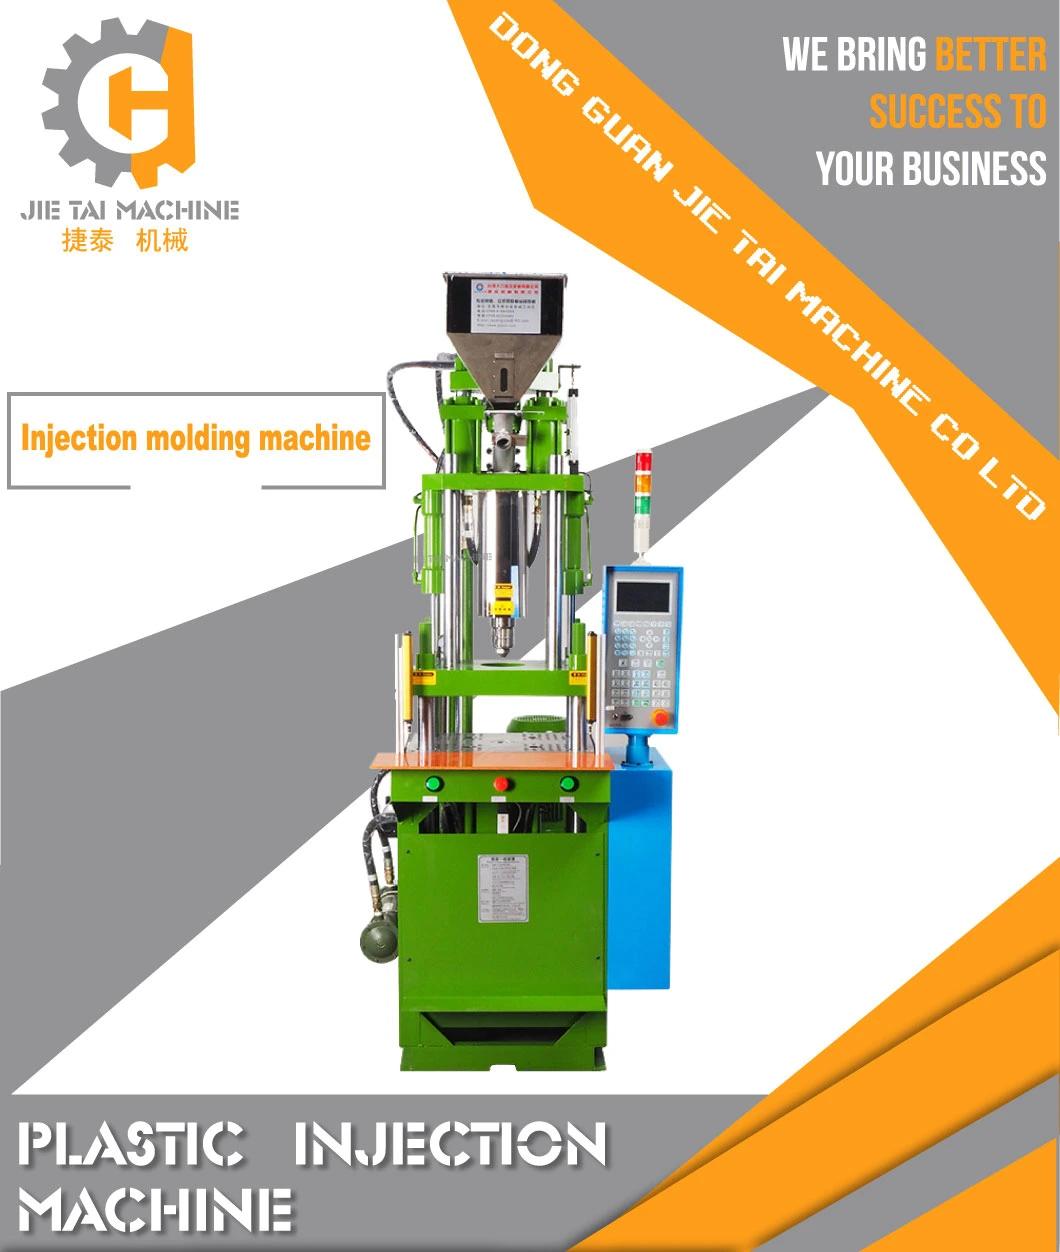 Bakelite Injection Molding Machine to Win Warm Praise From Customers